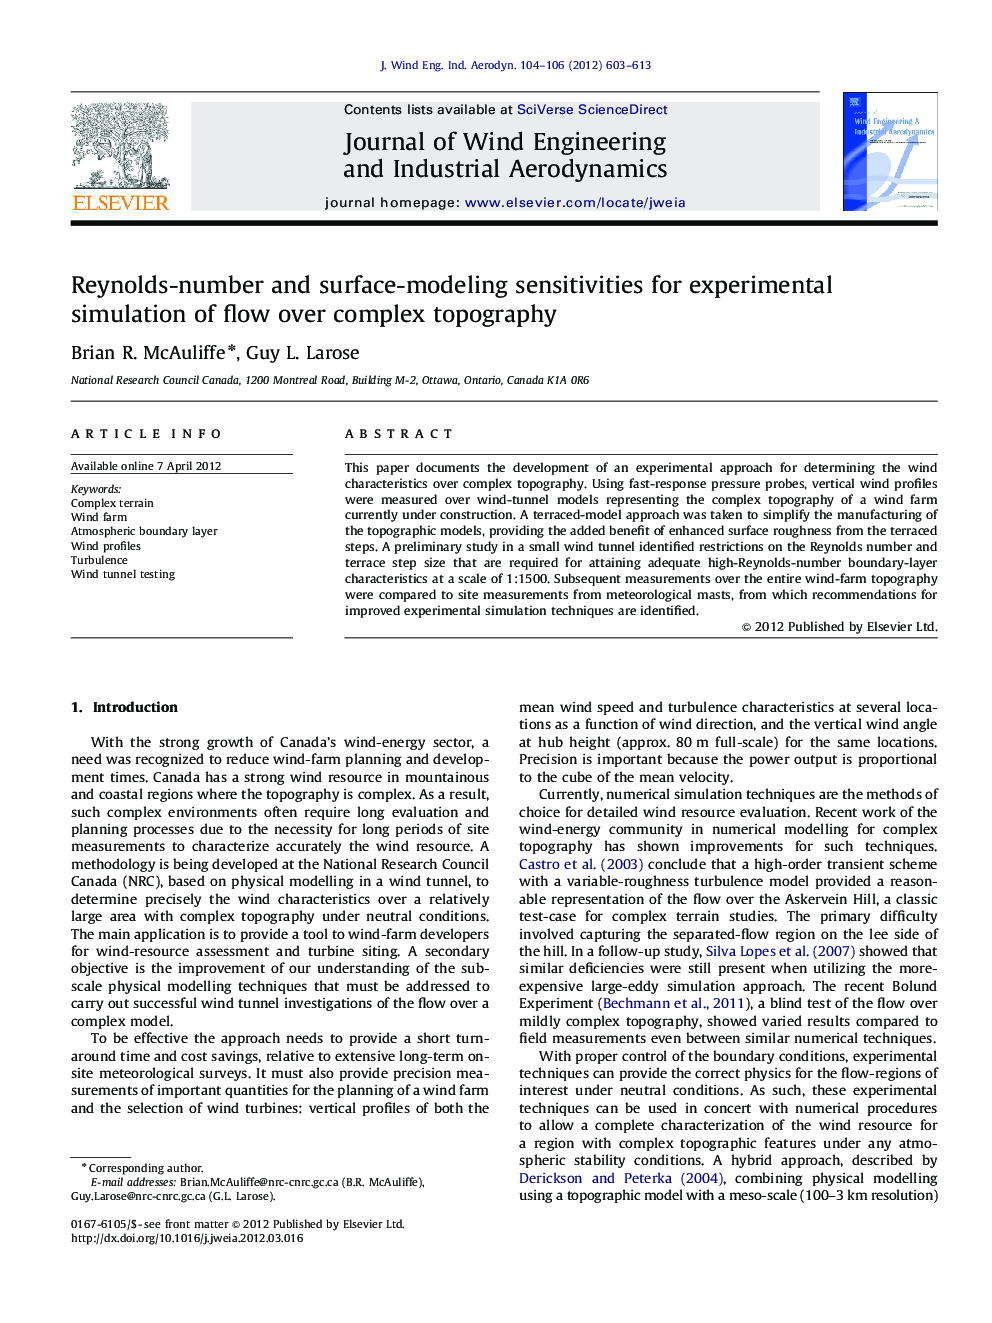 Reynolds-number and surface-modeling sensitivities for experimental simulation of flow over complex topography